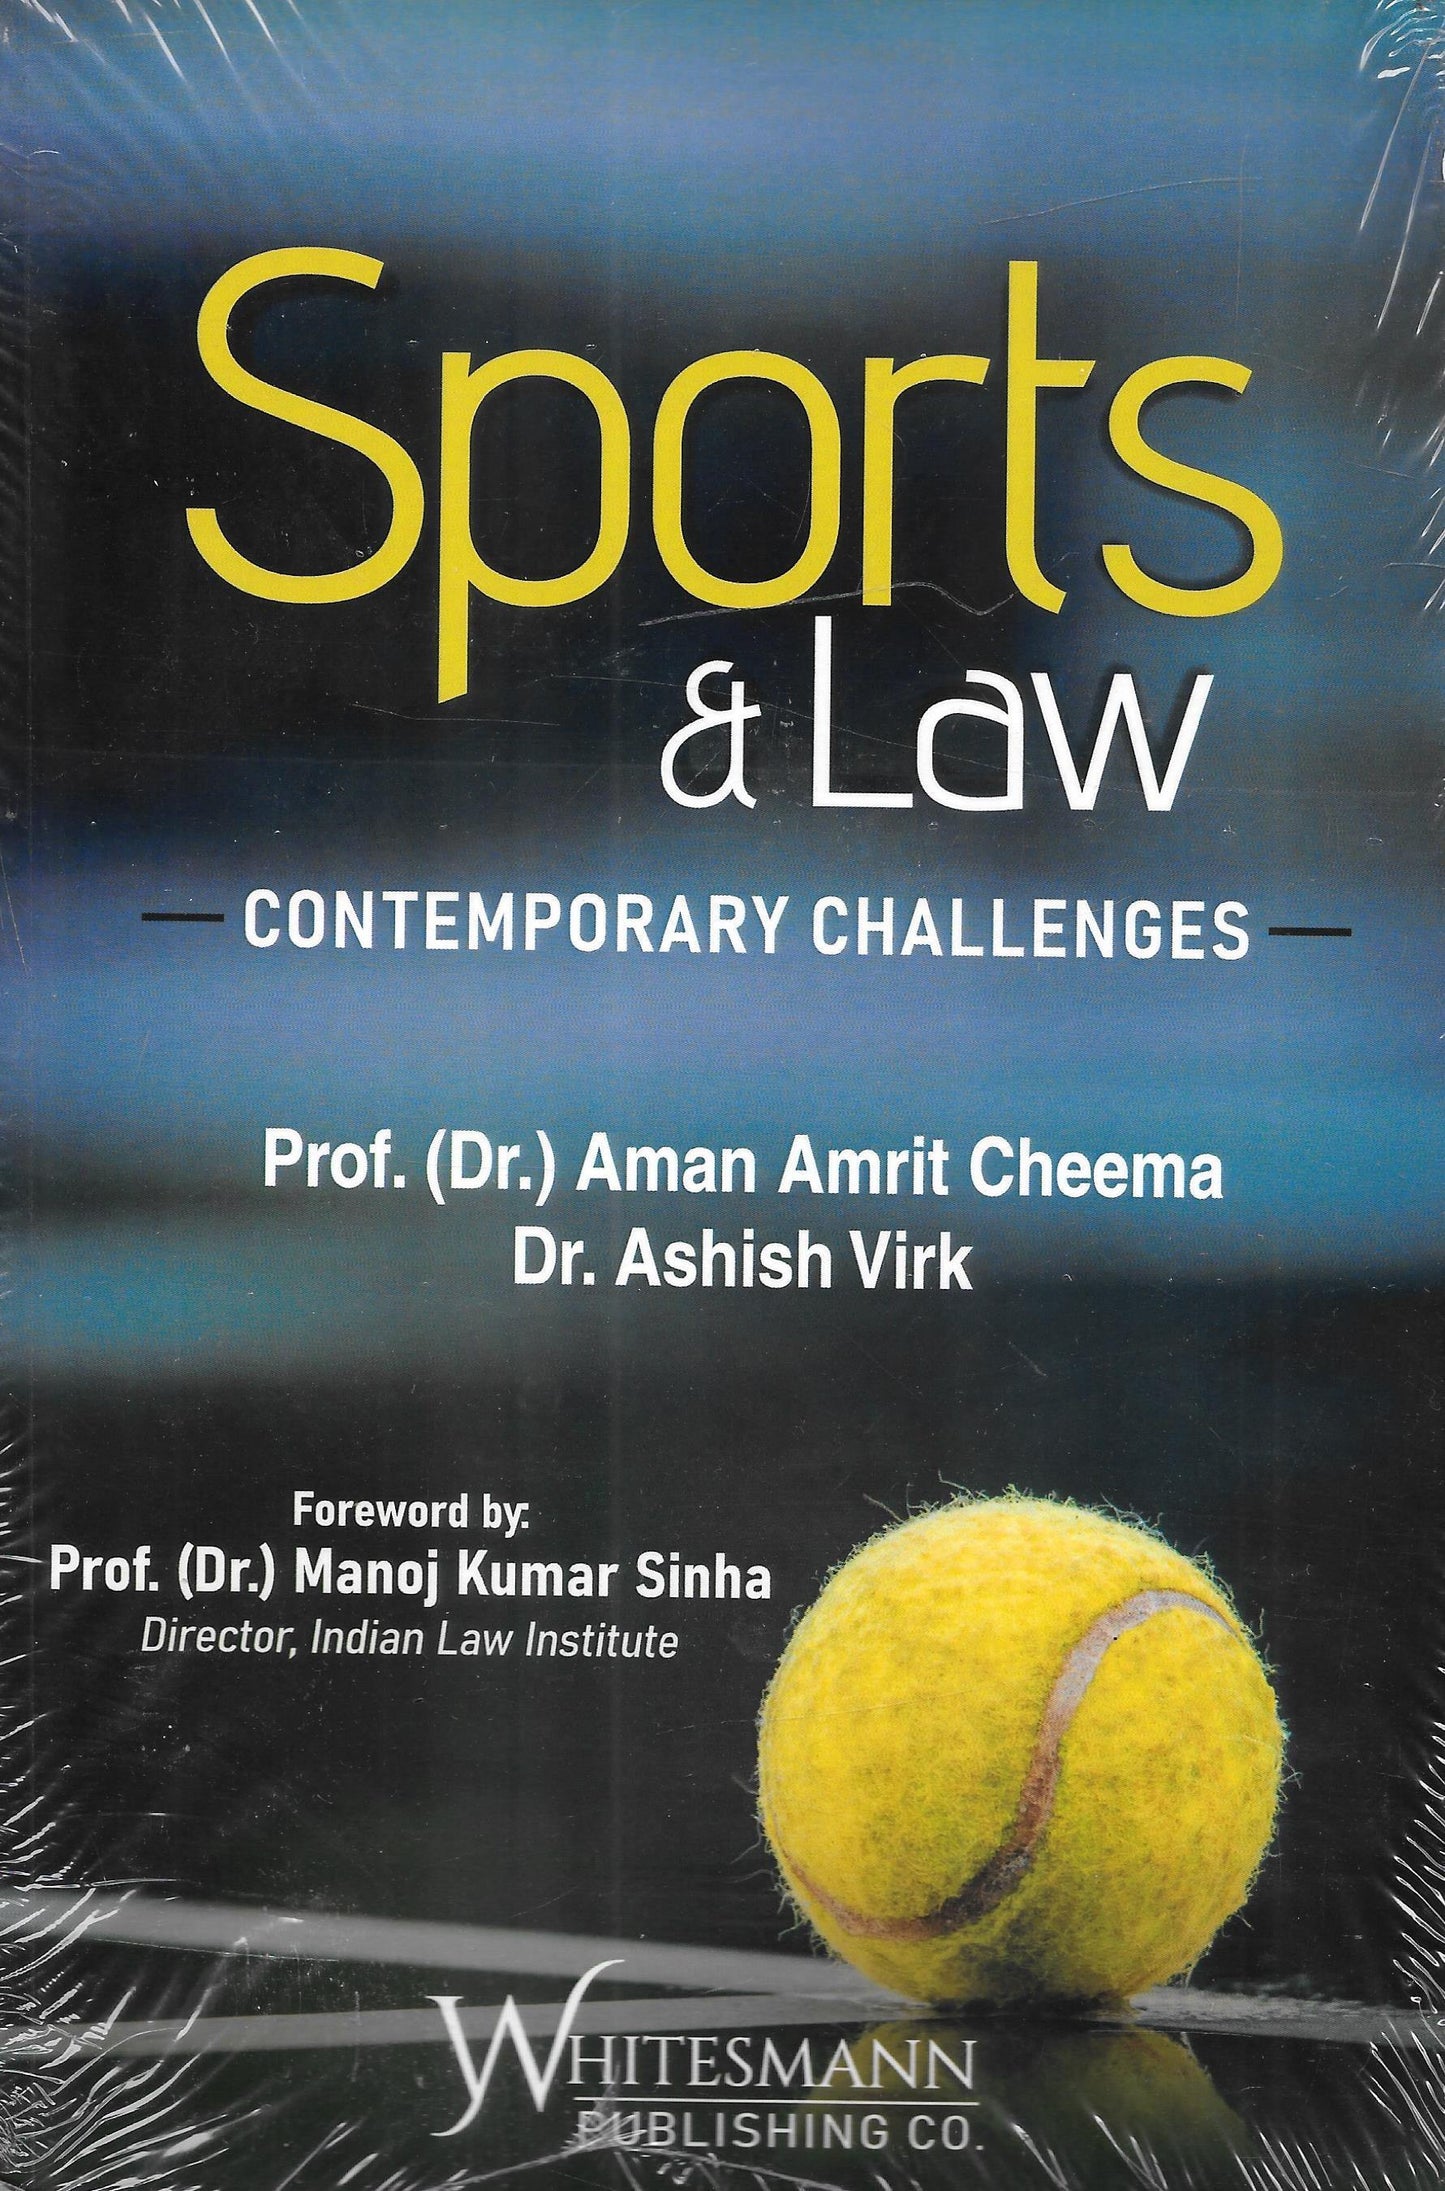 Sports & Law Contemporary Challenges